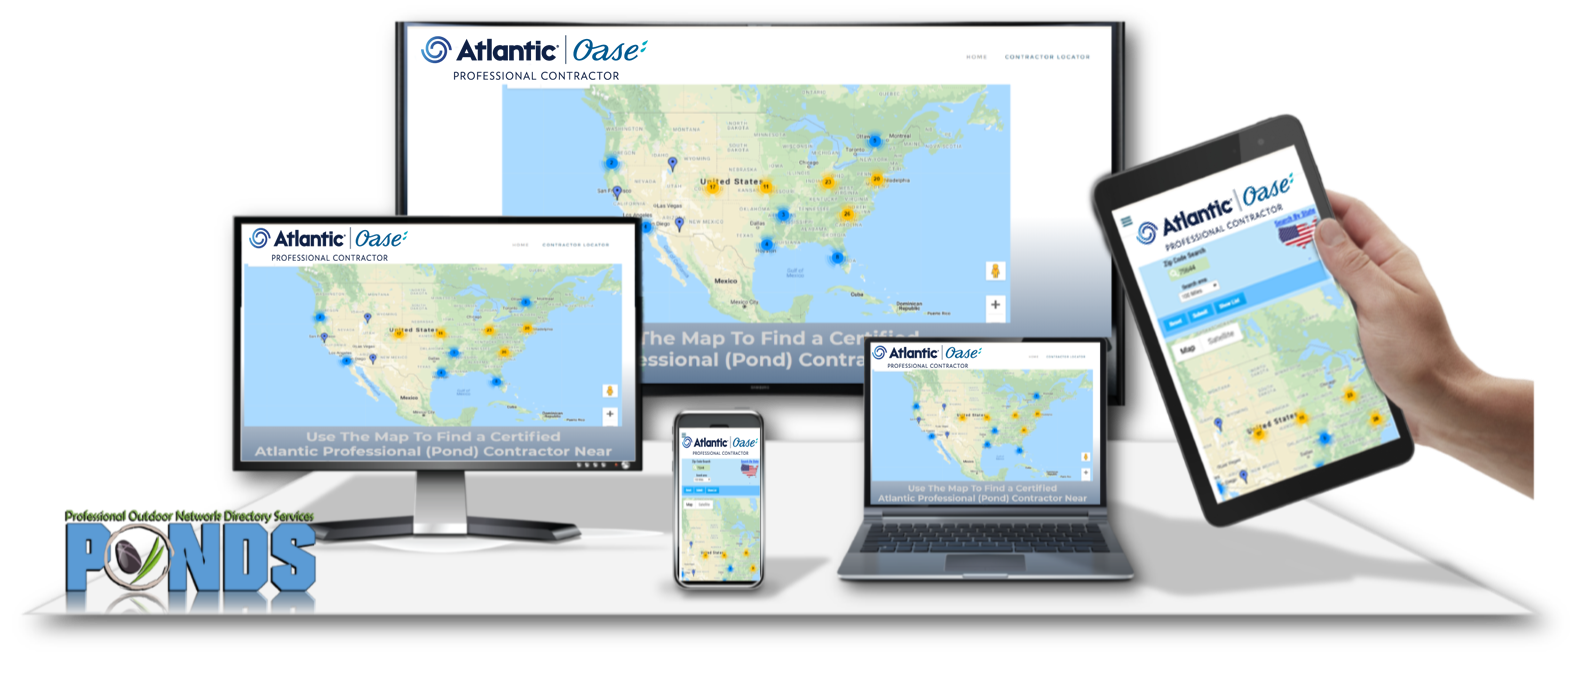 Locate an Atlantic Professional Pond Contractor Near You